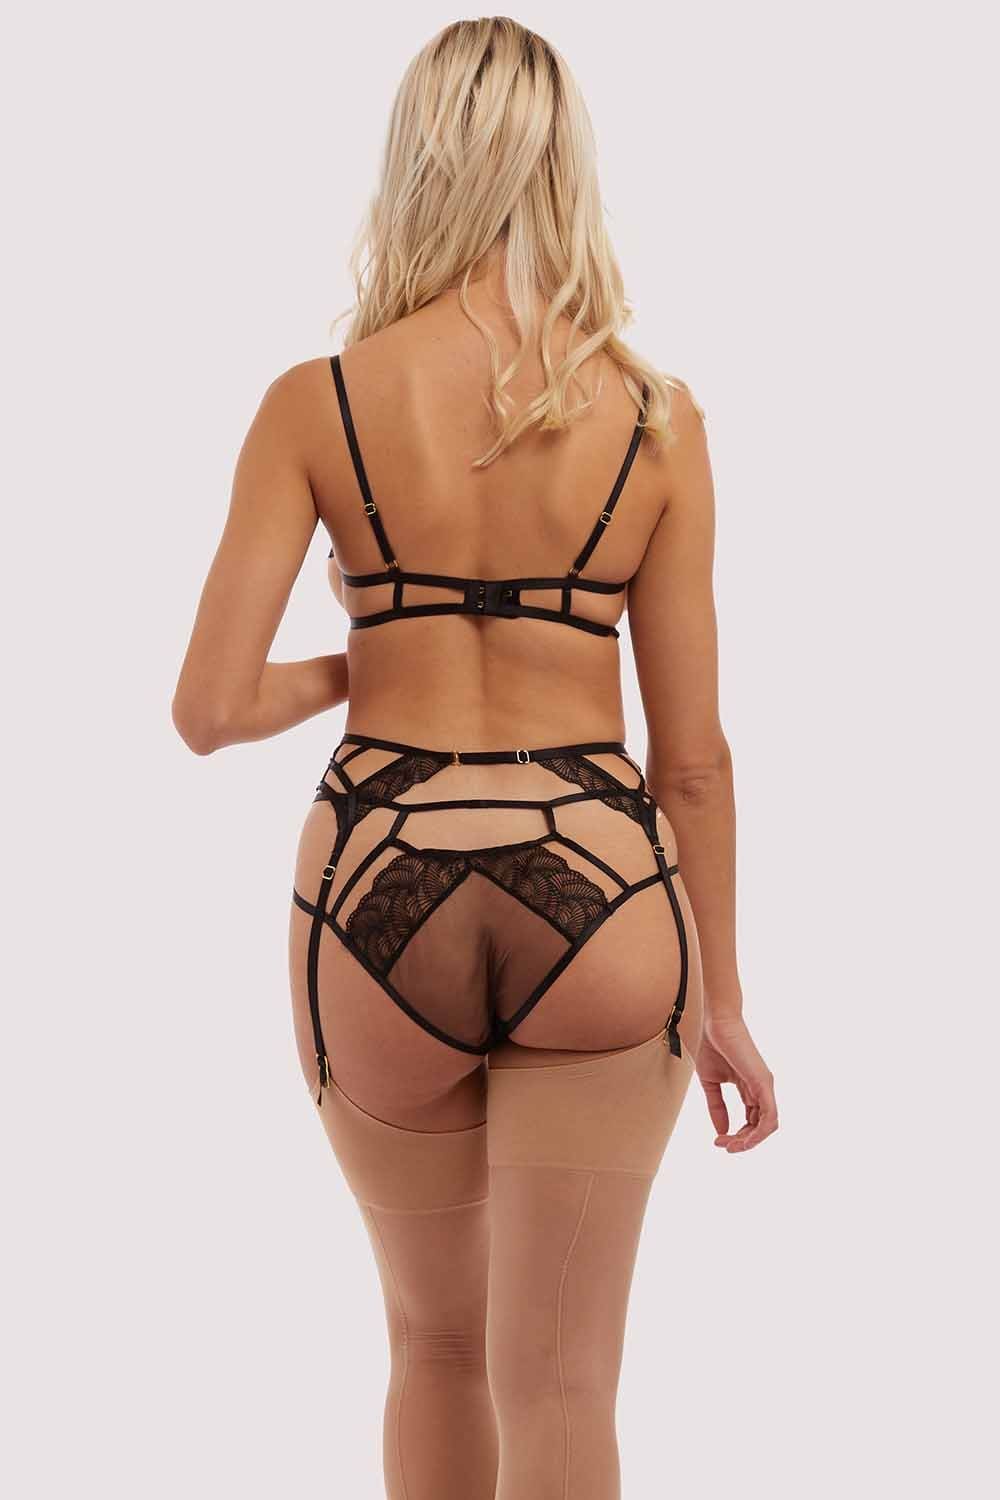 Tilly Black Caged Embroidery Suspender